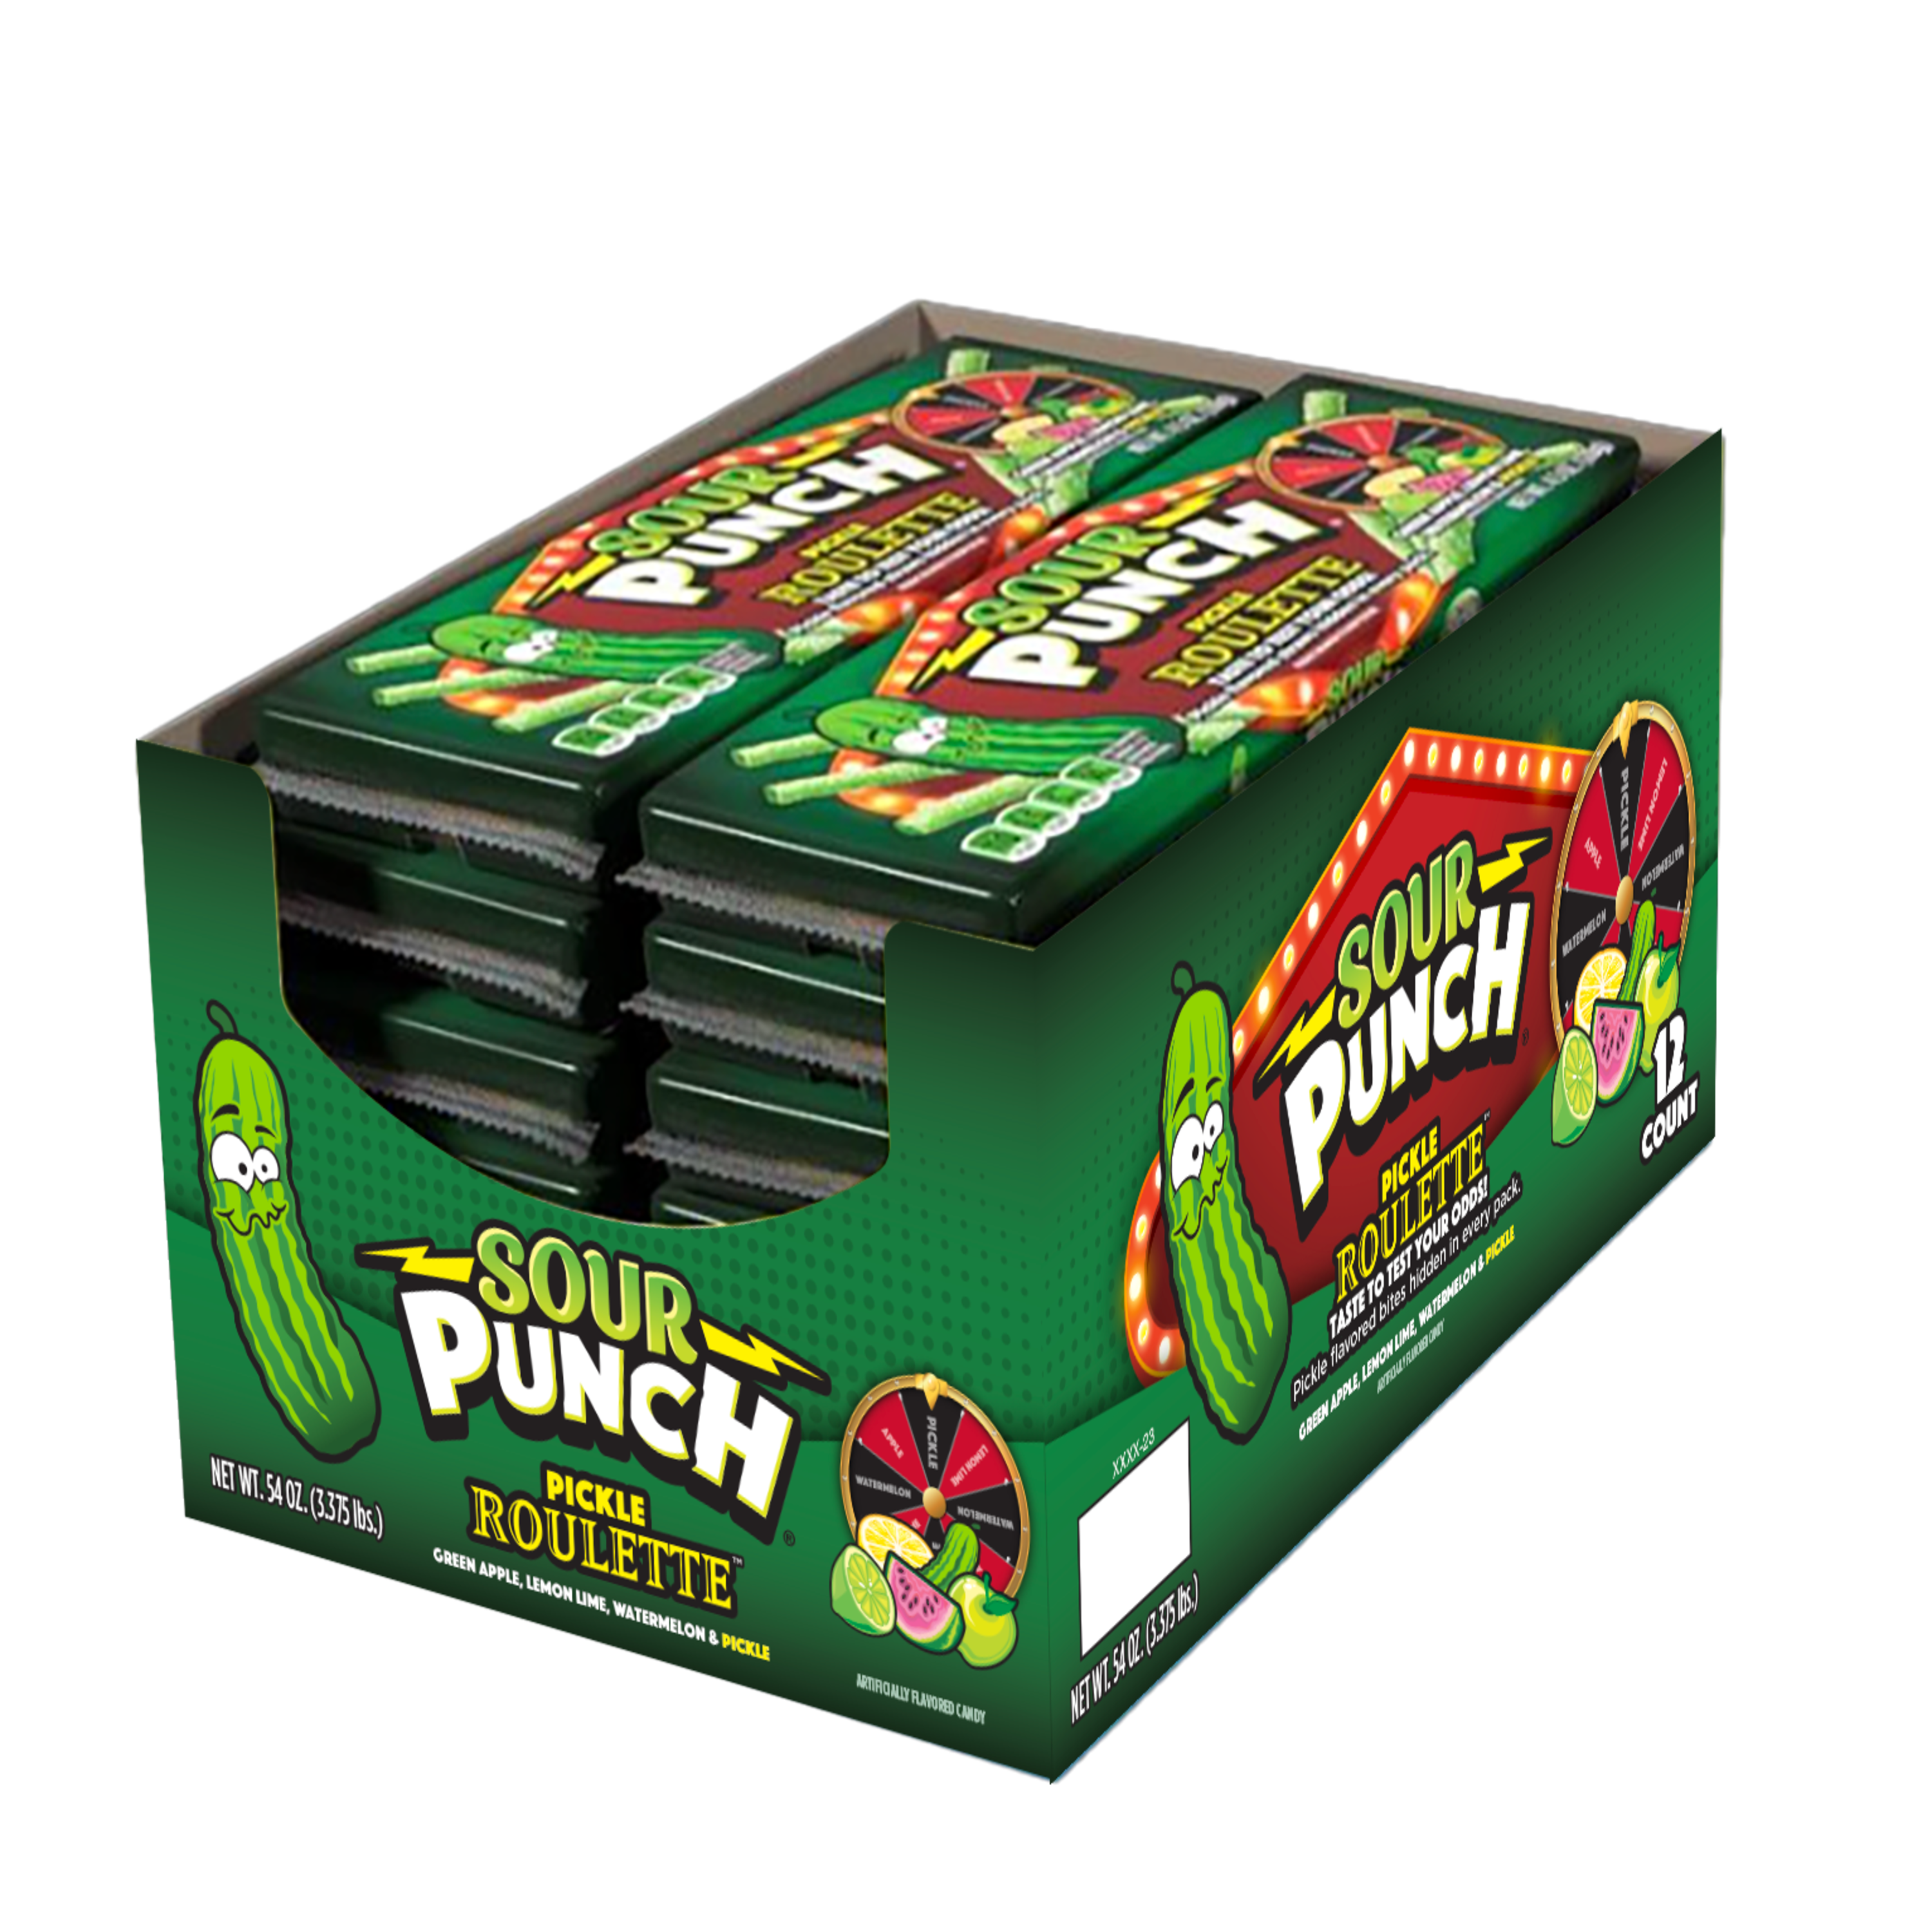 Sour Punch Pickle Roulette Straws, 4.5oz Tray